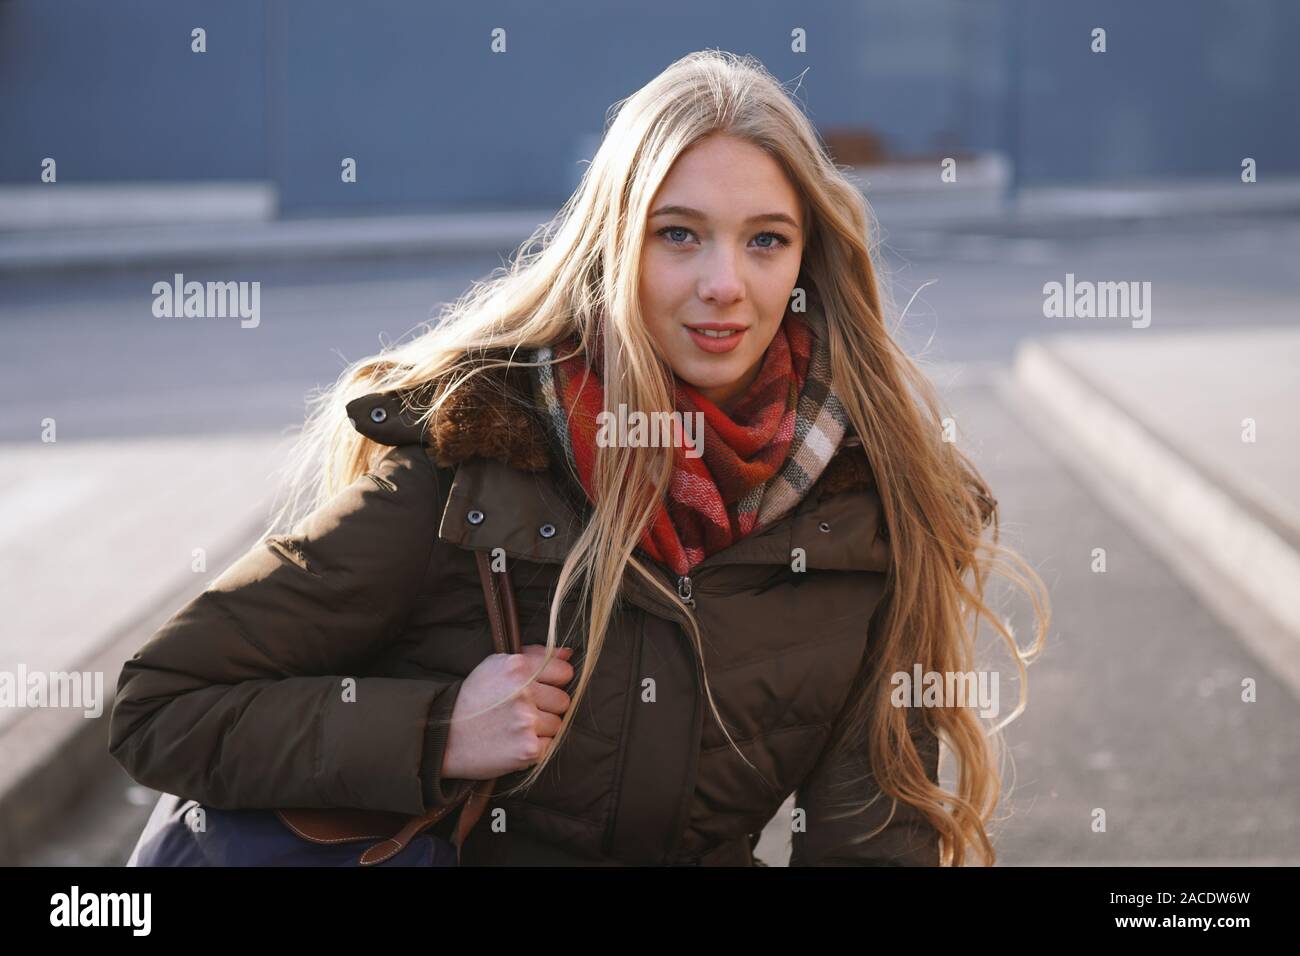 candid street style portrait of teenage girl waiting at bus stop on a sunny day in winter Stock Photo